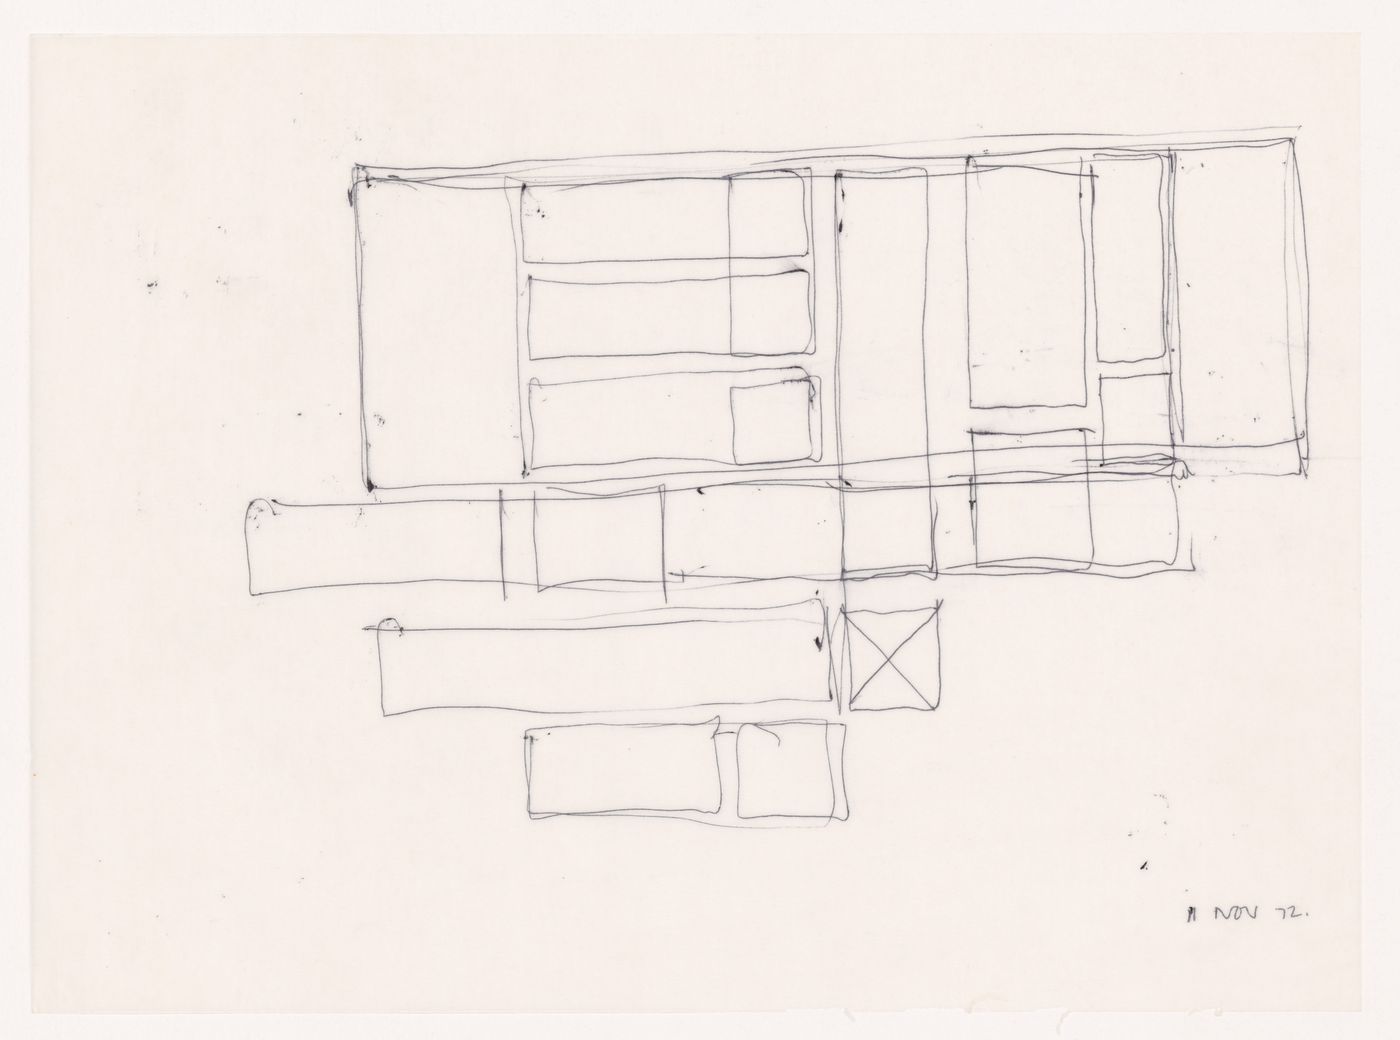 Sketch for House VI, Cornwall, Connecticut